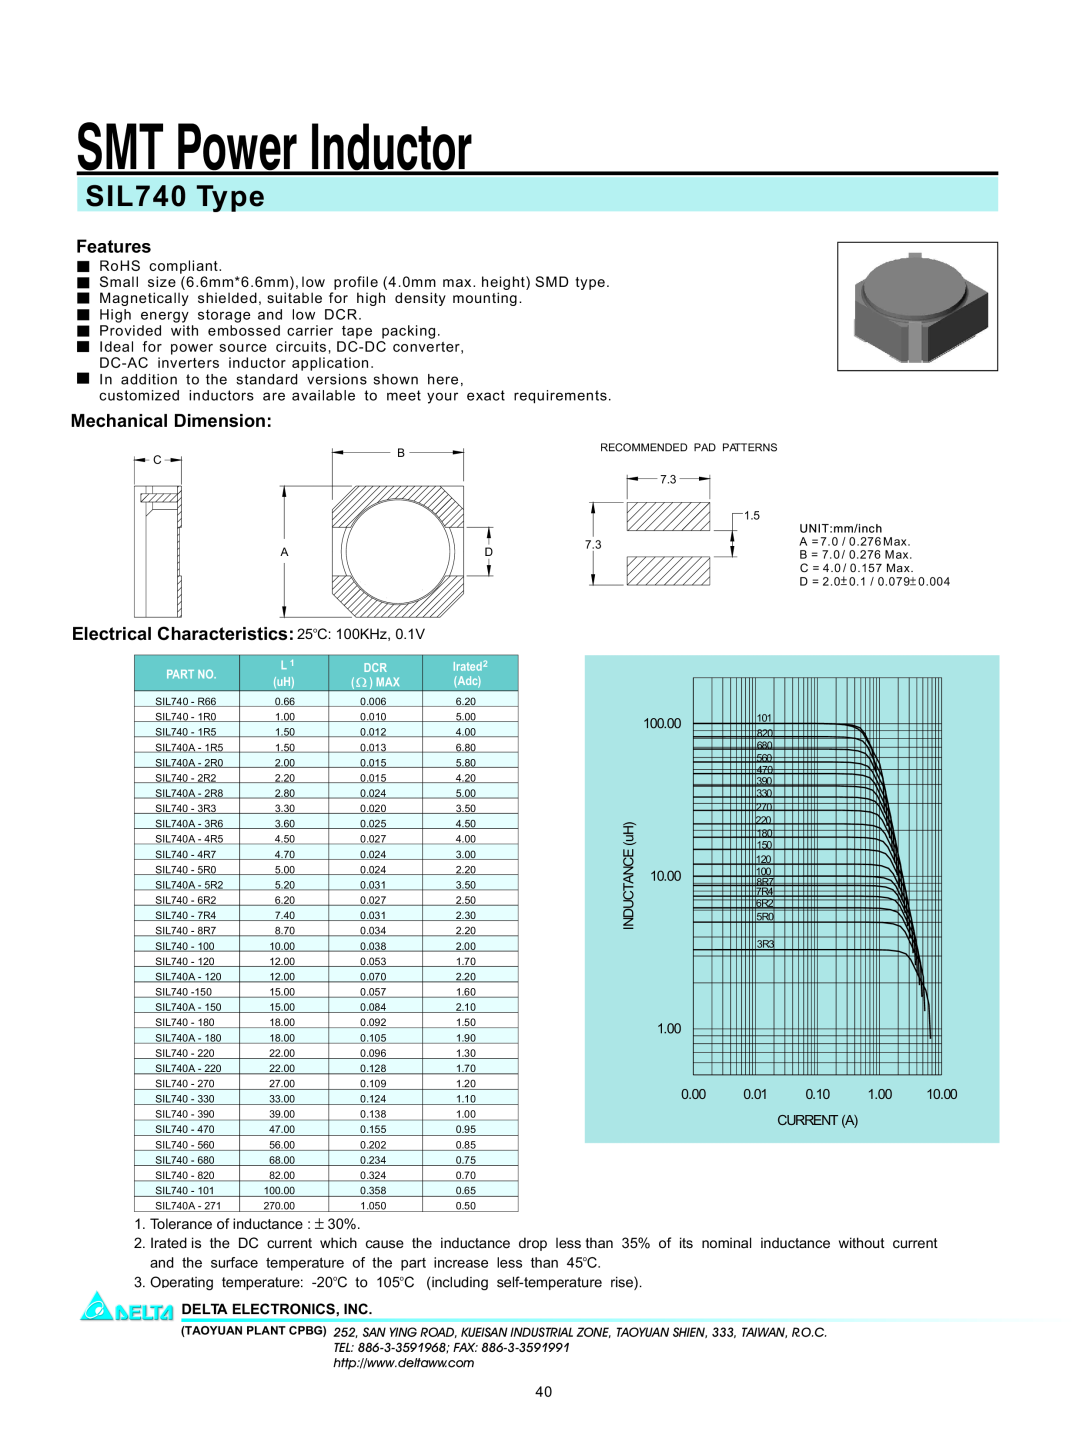 Delta Electronics manual SMT Power Inductor, SIL740 Type, Features, Mechanical Dimension, Delta Electronics, Inc 